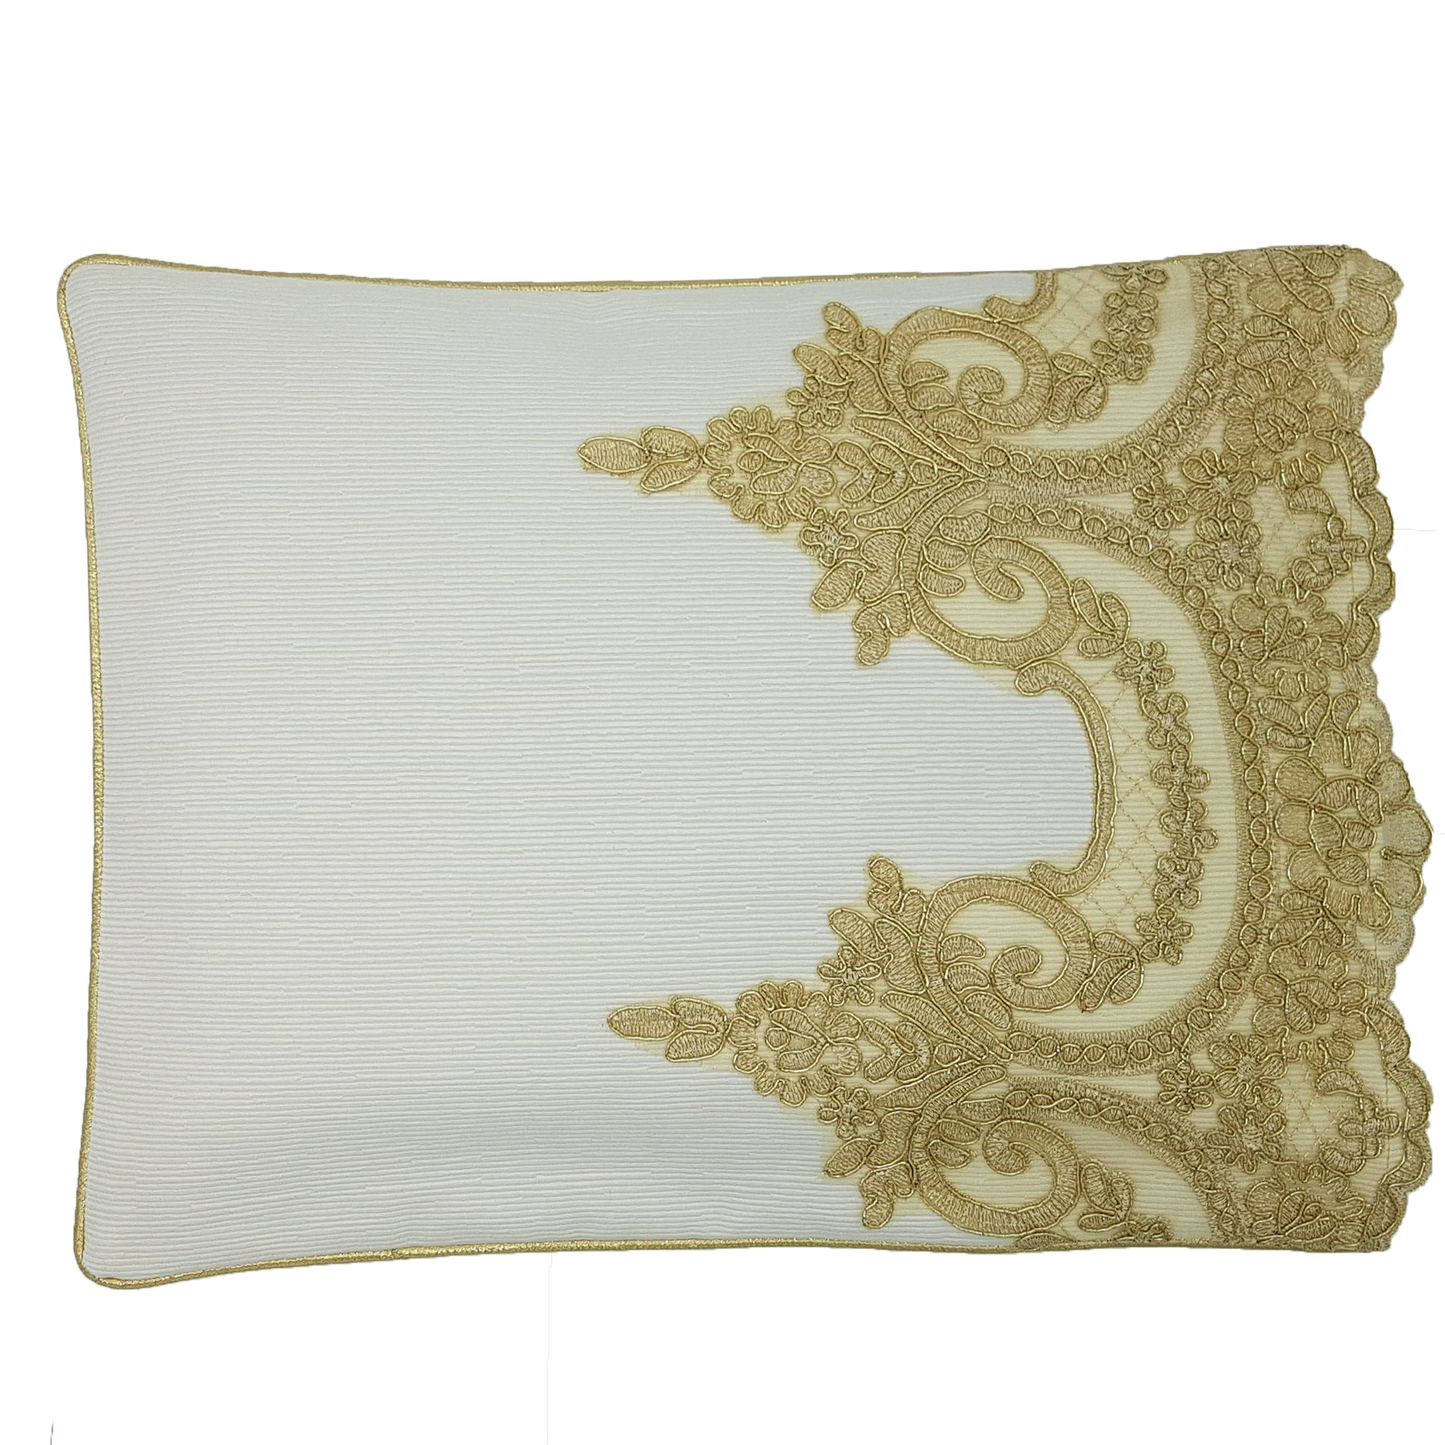 Exclusive Gold Lace Pillowcase, Ivory Ottoman